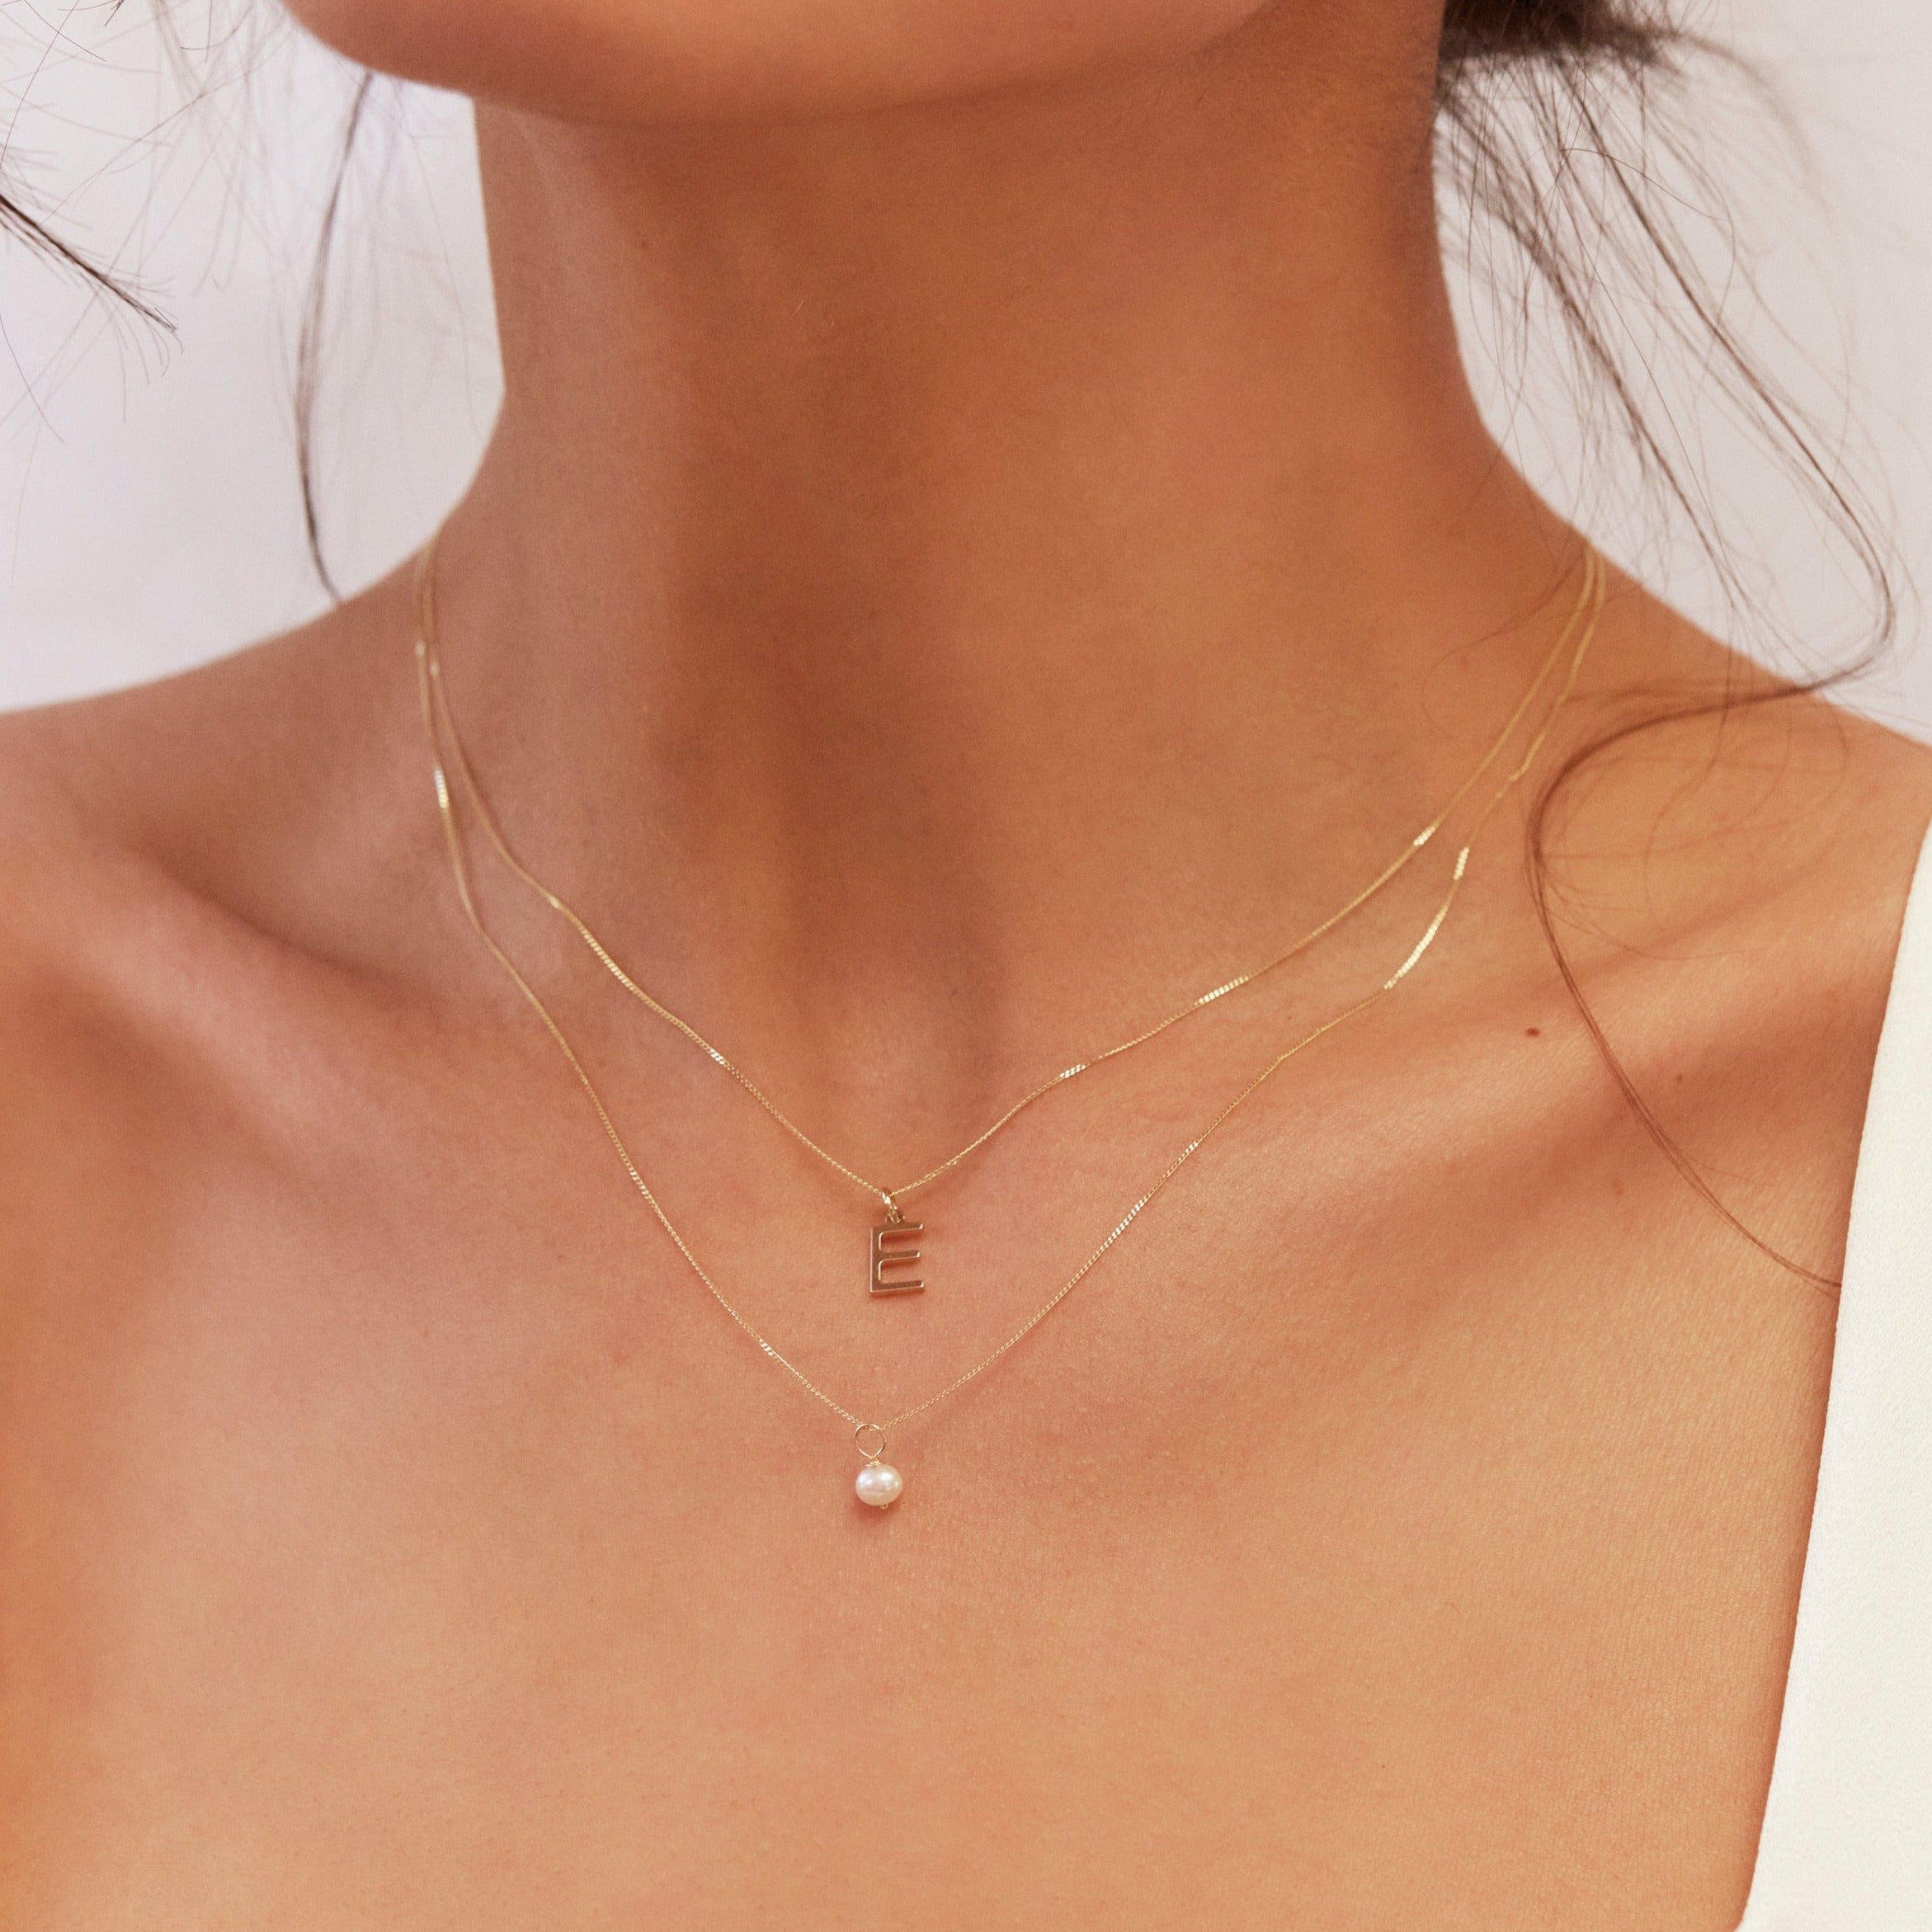 Gold single pearl necklace layered with a gold E letter necklace around a neck close up